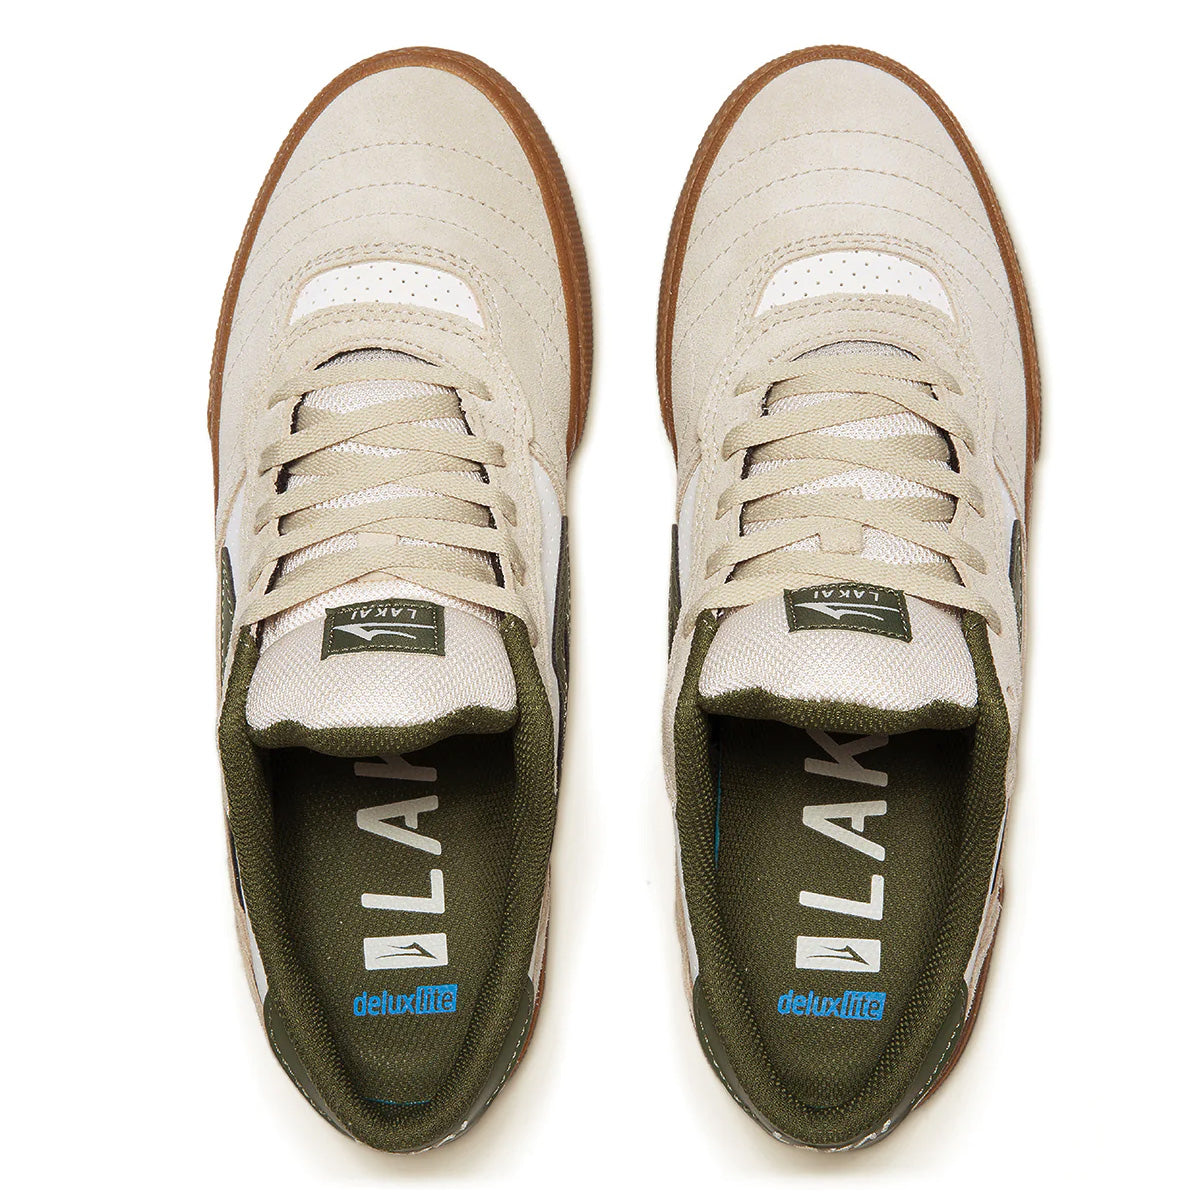 Cream and olive green suede skateboarding shoes from Lakai. Pay by Klarna or Clearpay.